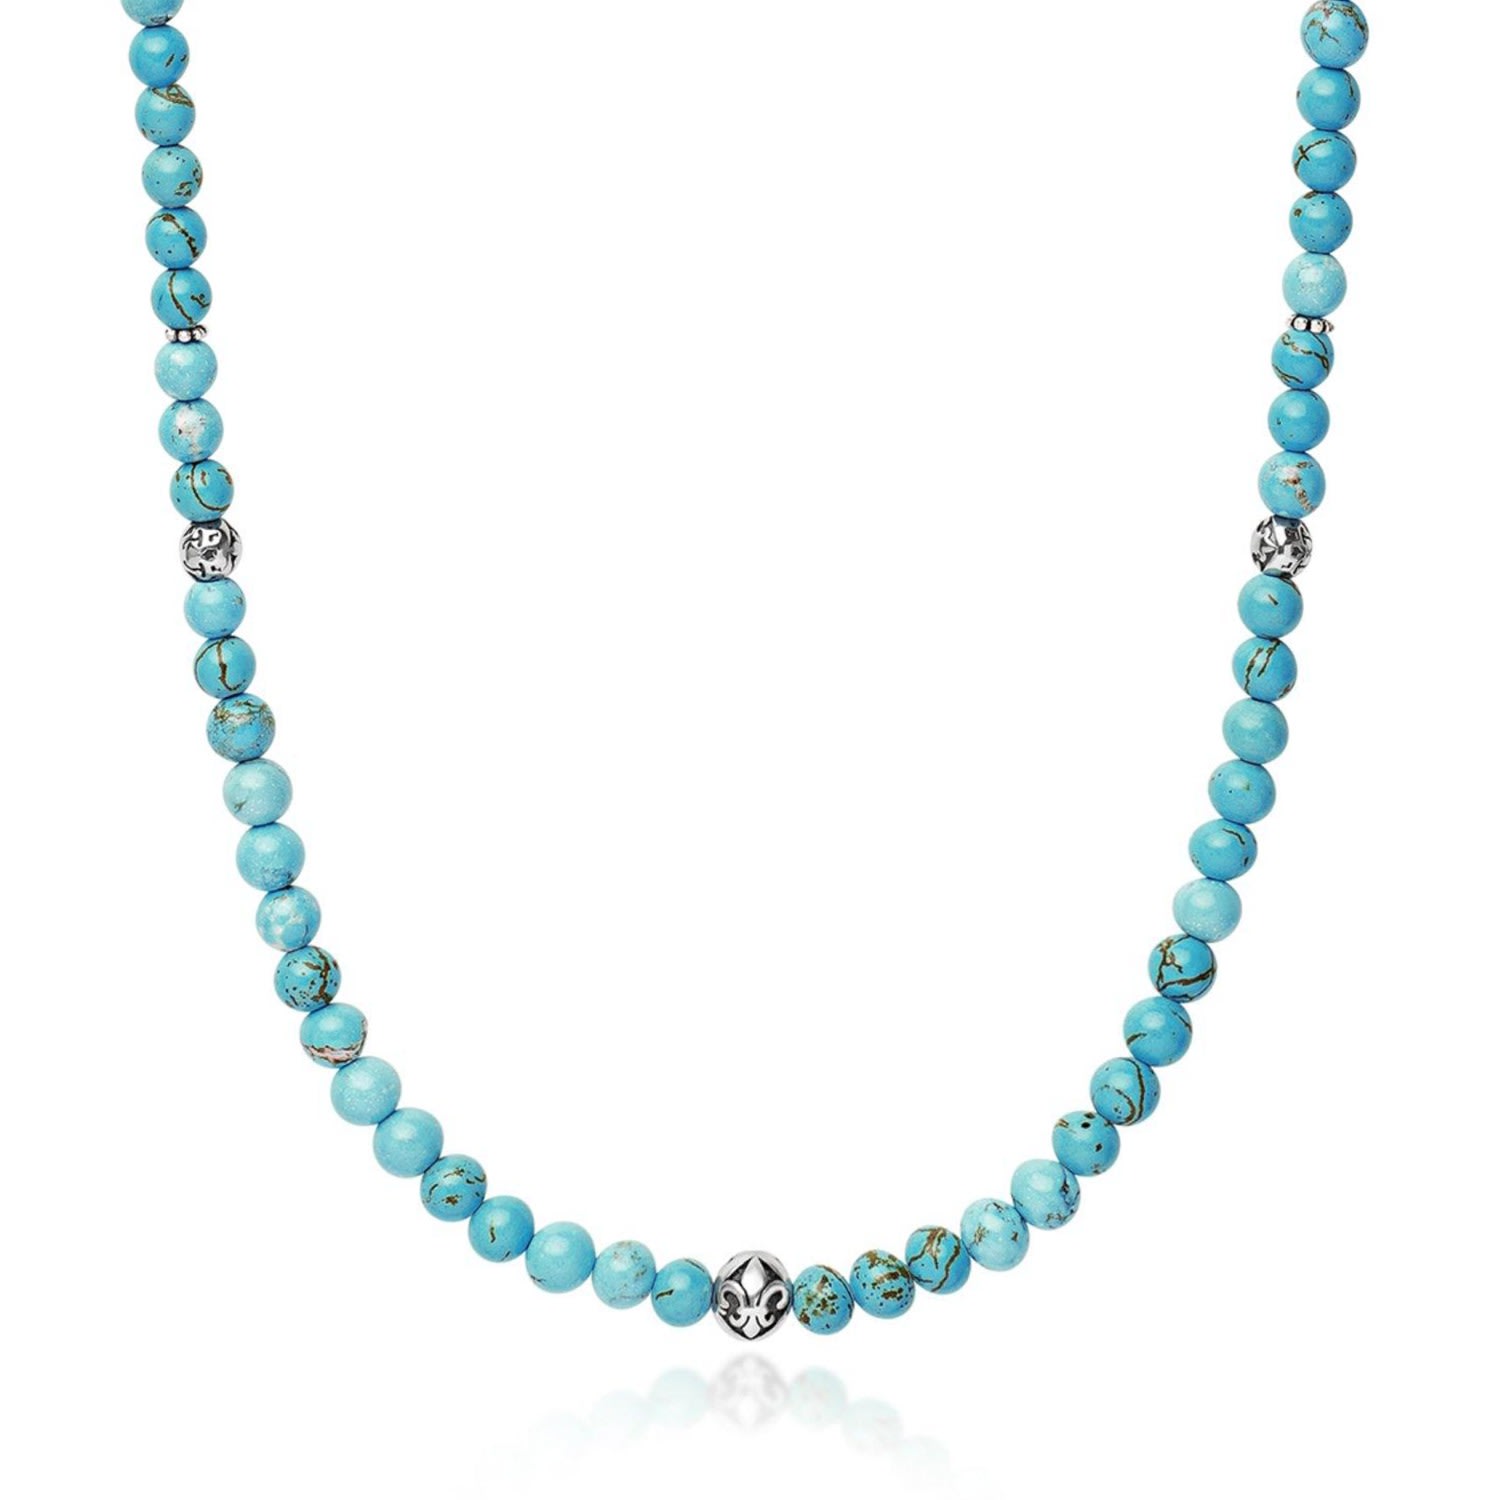 Men's Beaded Necklace With Turquoise And Silver Nialaya